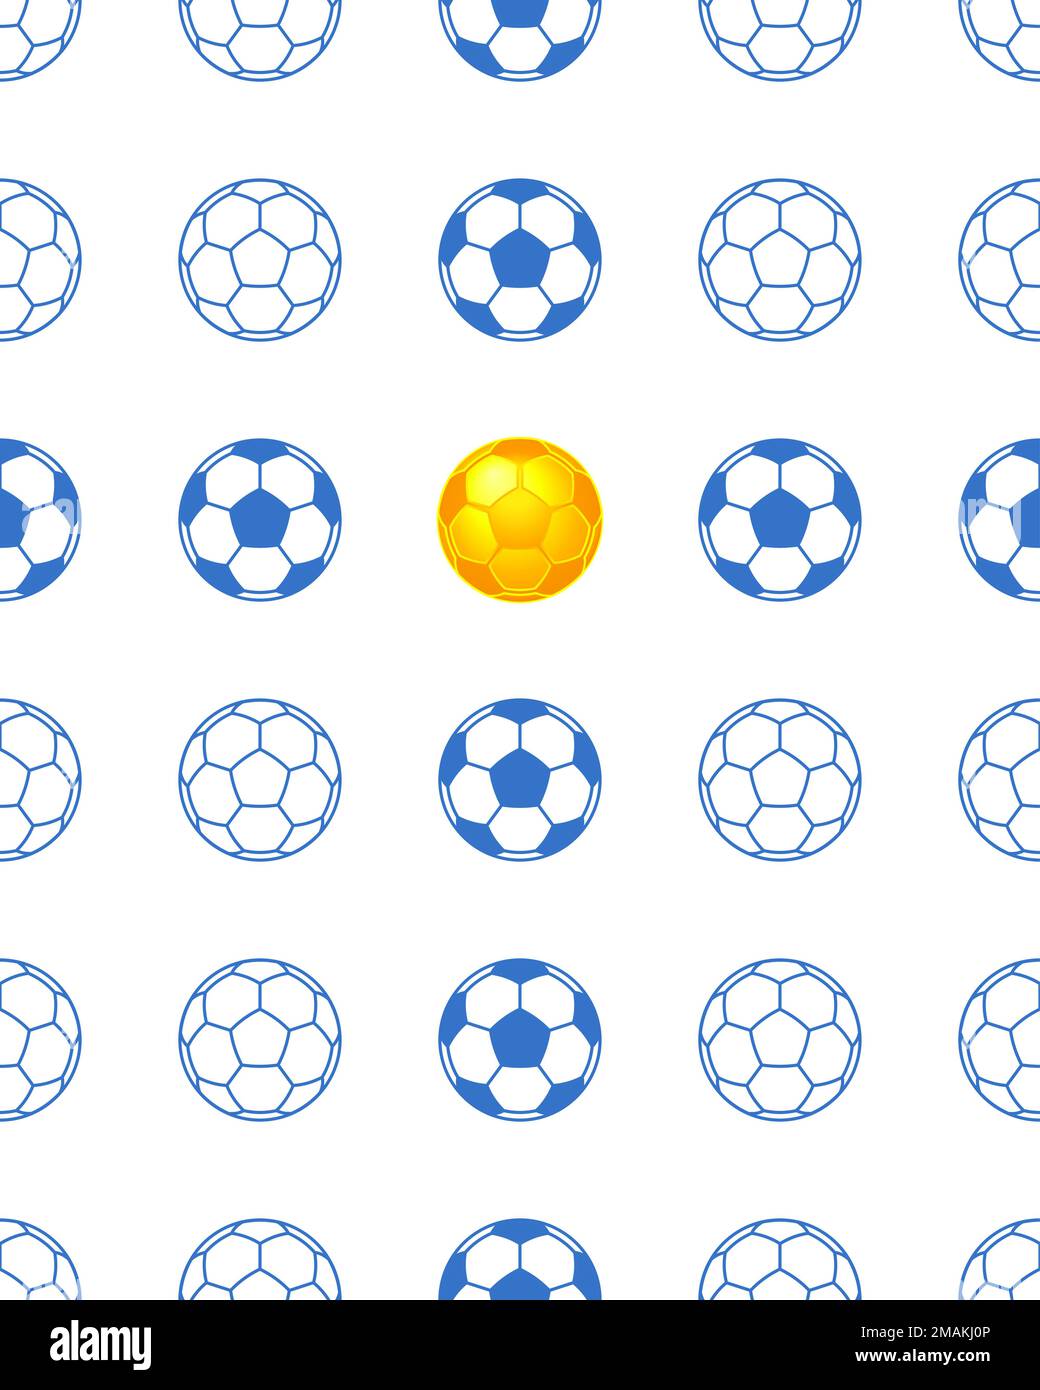 Seamless pattern of blue and gold soccer balls Stock Vector